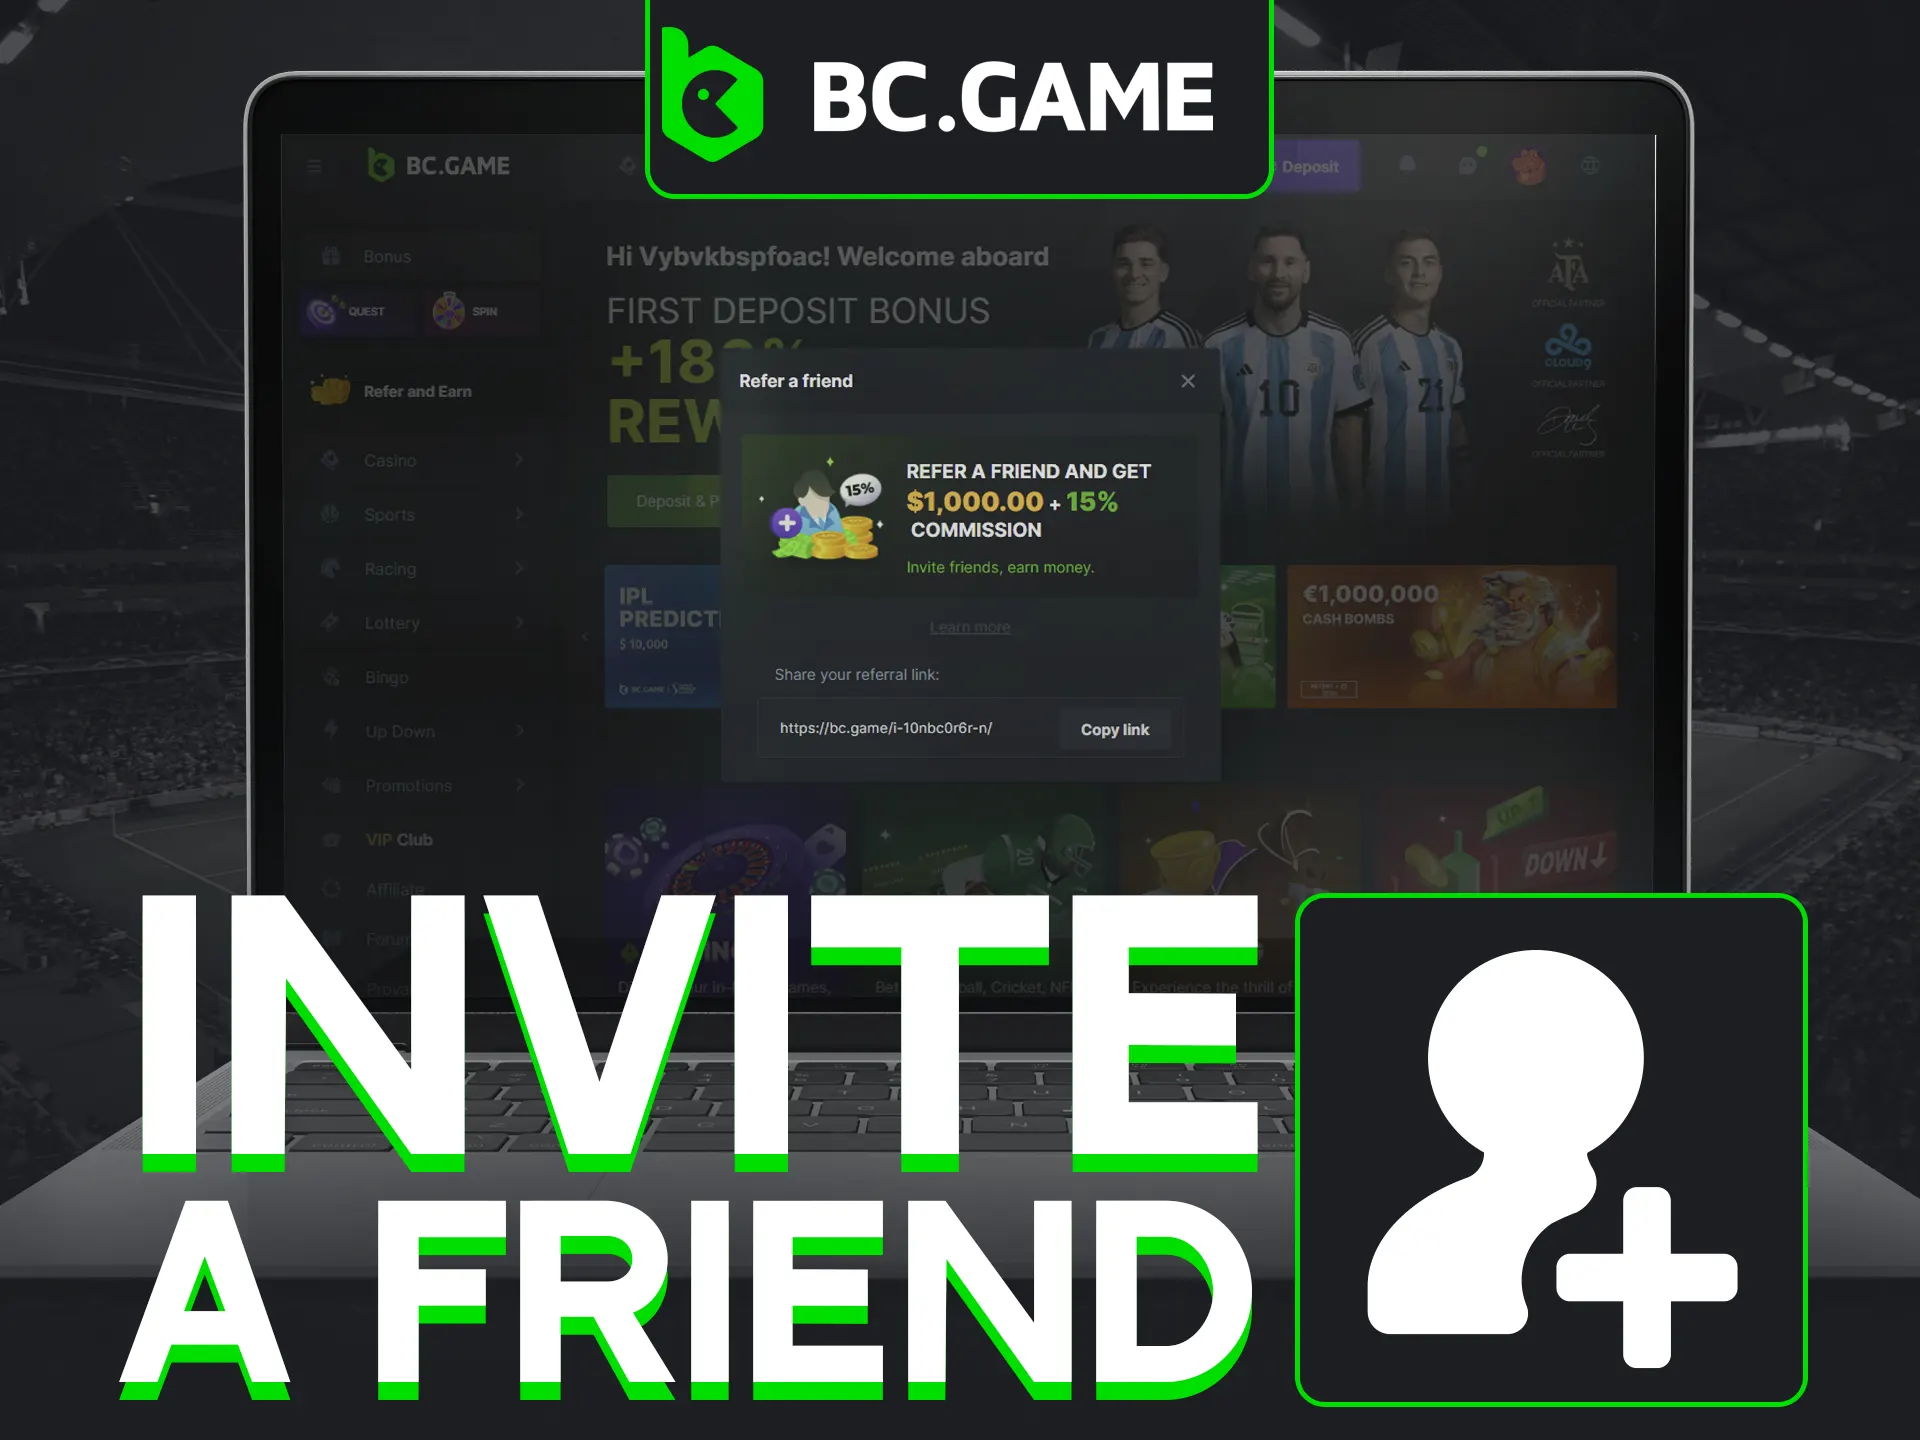 Invite friends to BC Game, earn bonuses with referral link.